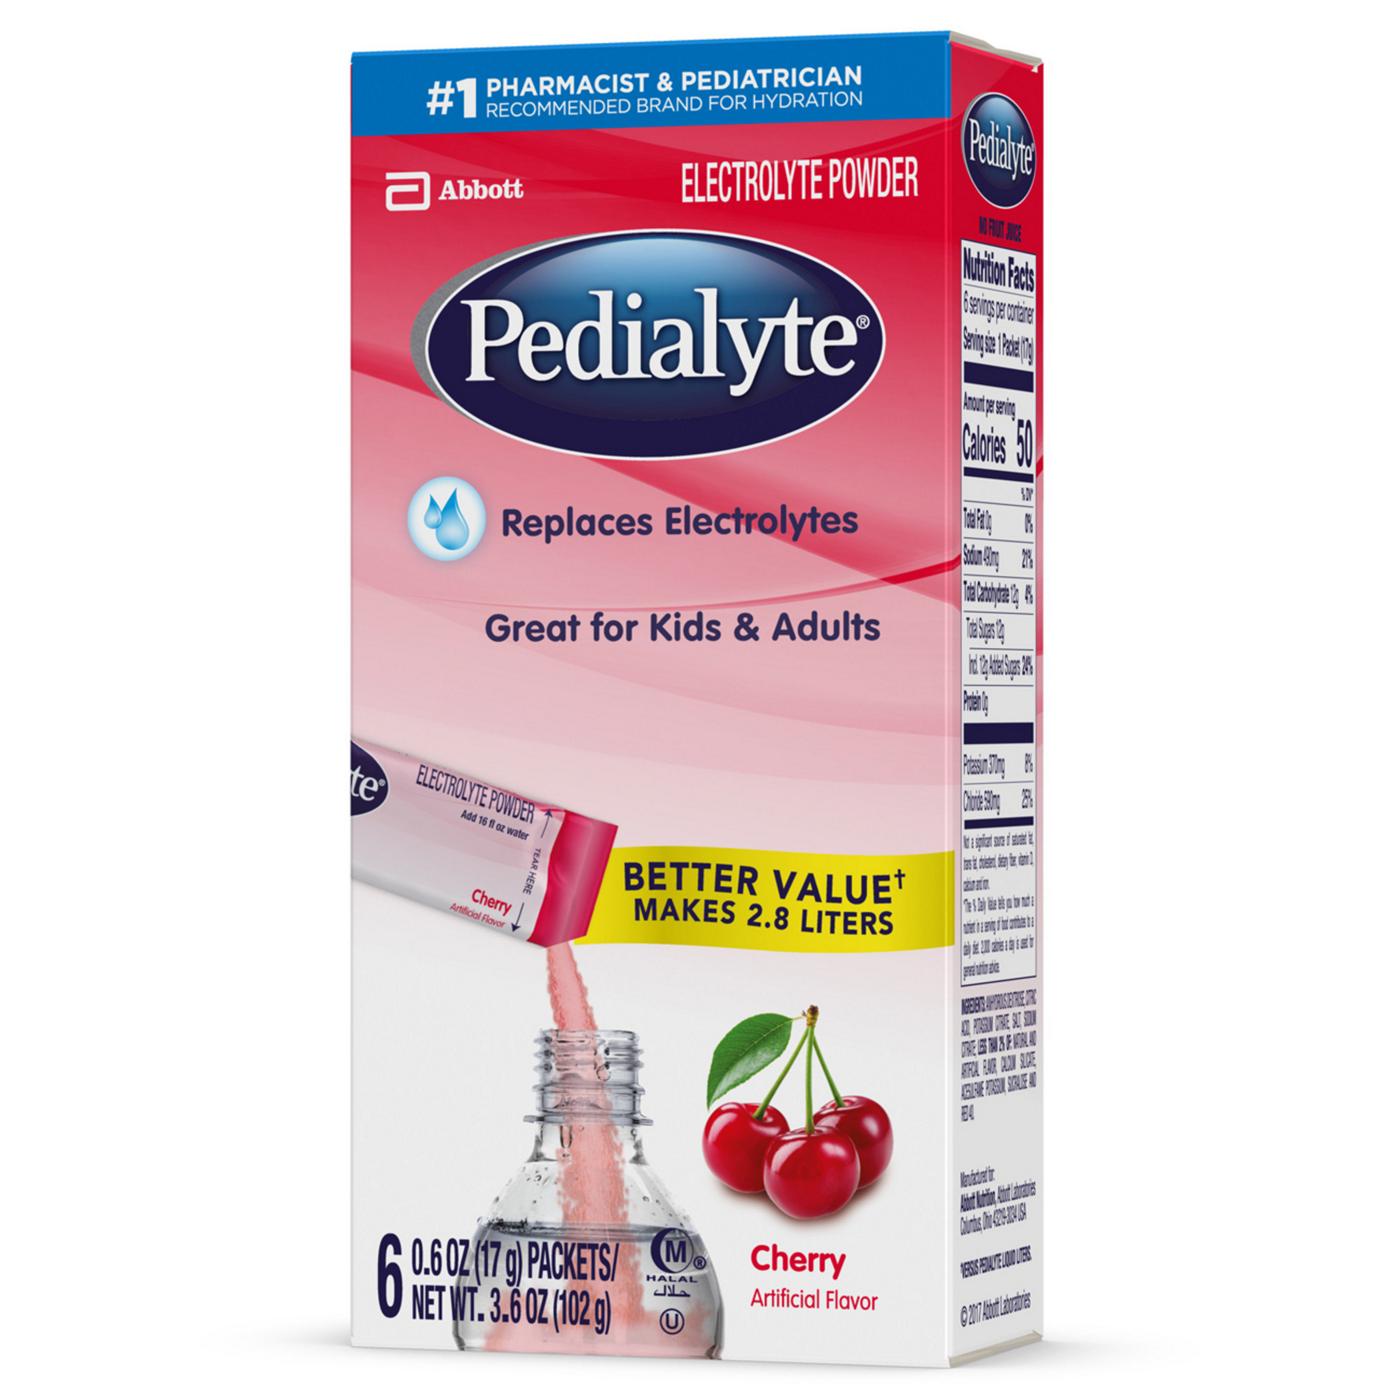 Pedialyte Electrolyte Powder Packets - Cherry; image 7 of 7